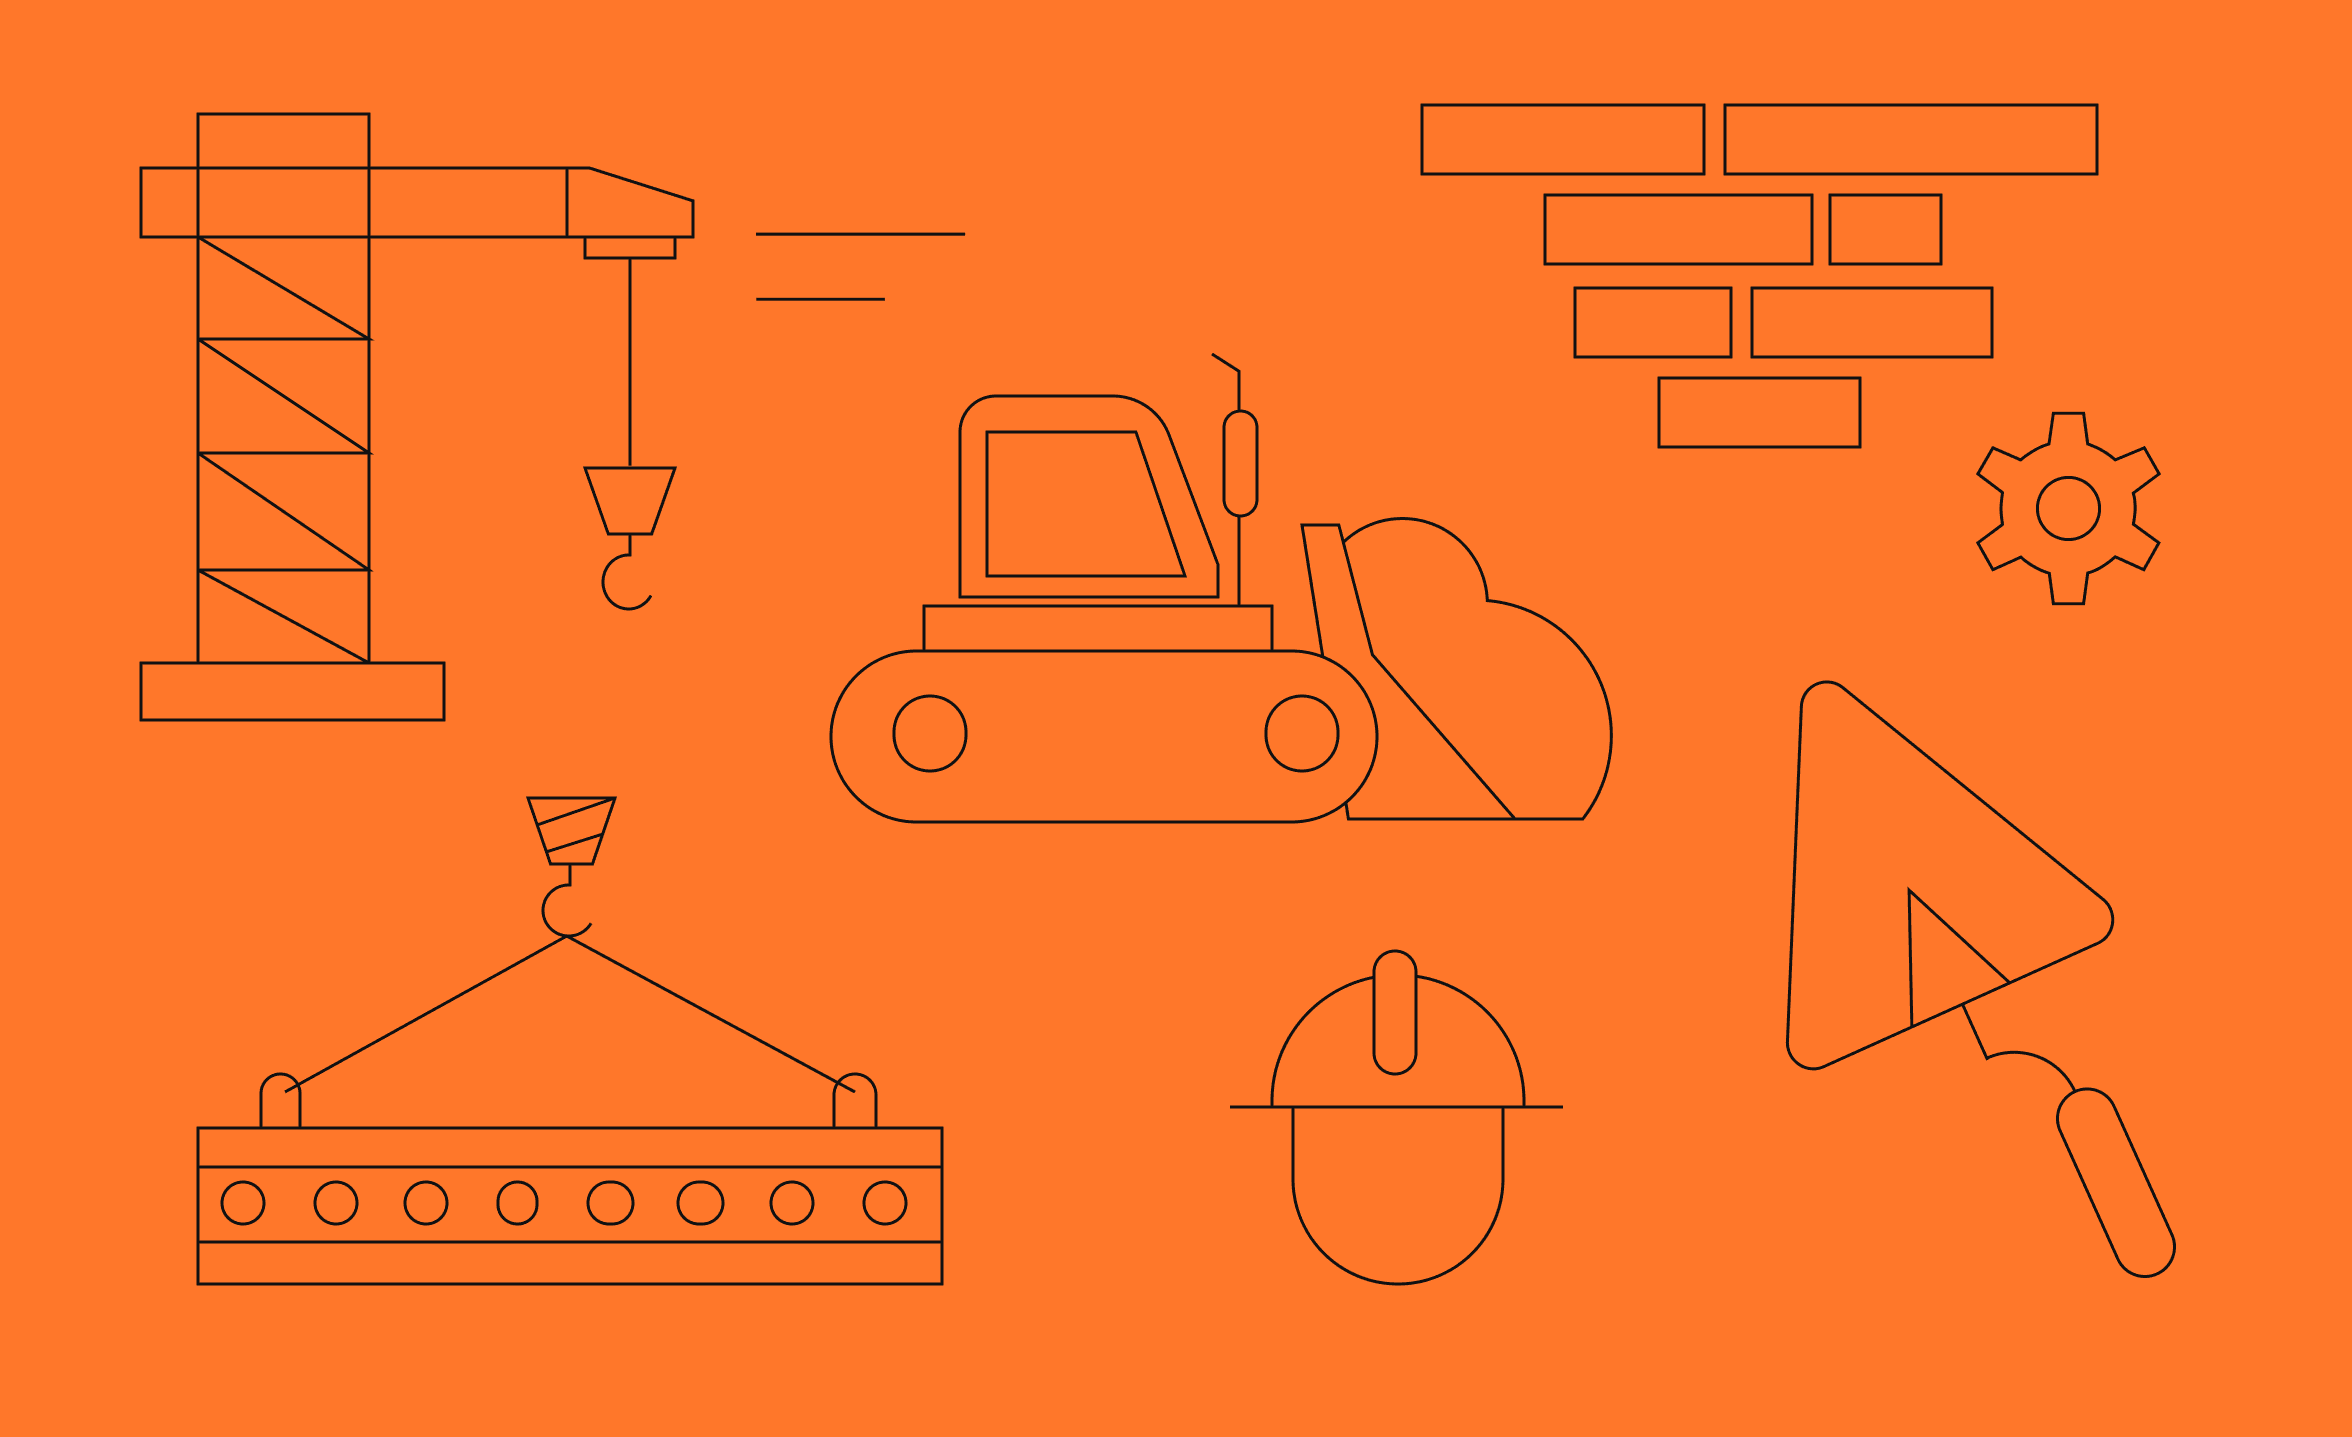 Line illustrations of construction-related icons, including a crane, bulldozer, trowel, and a person in a hard hat.